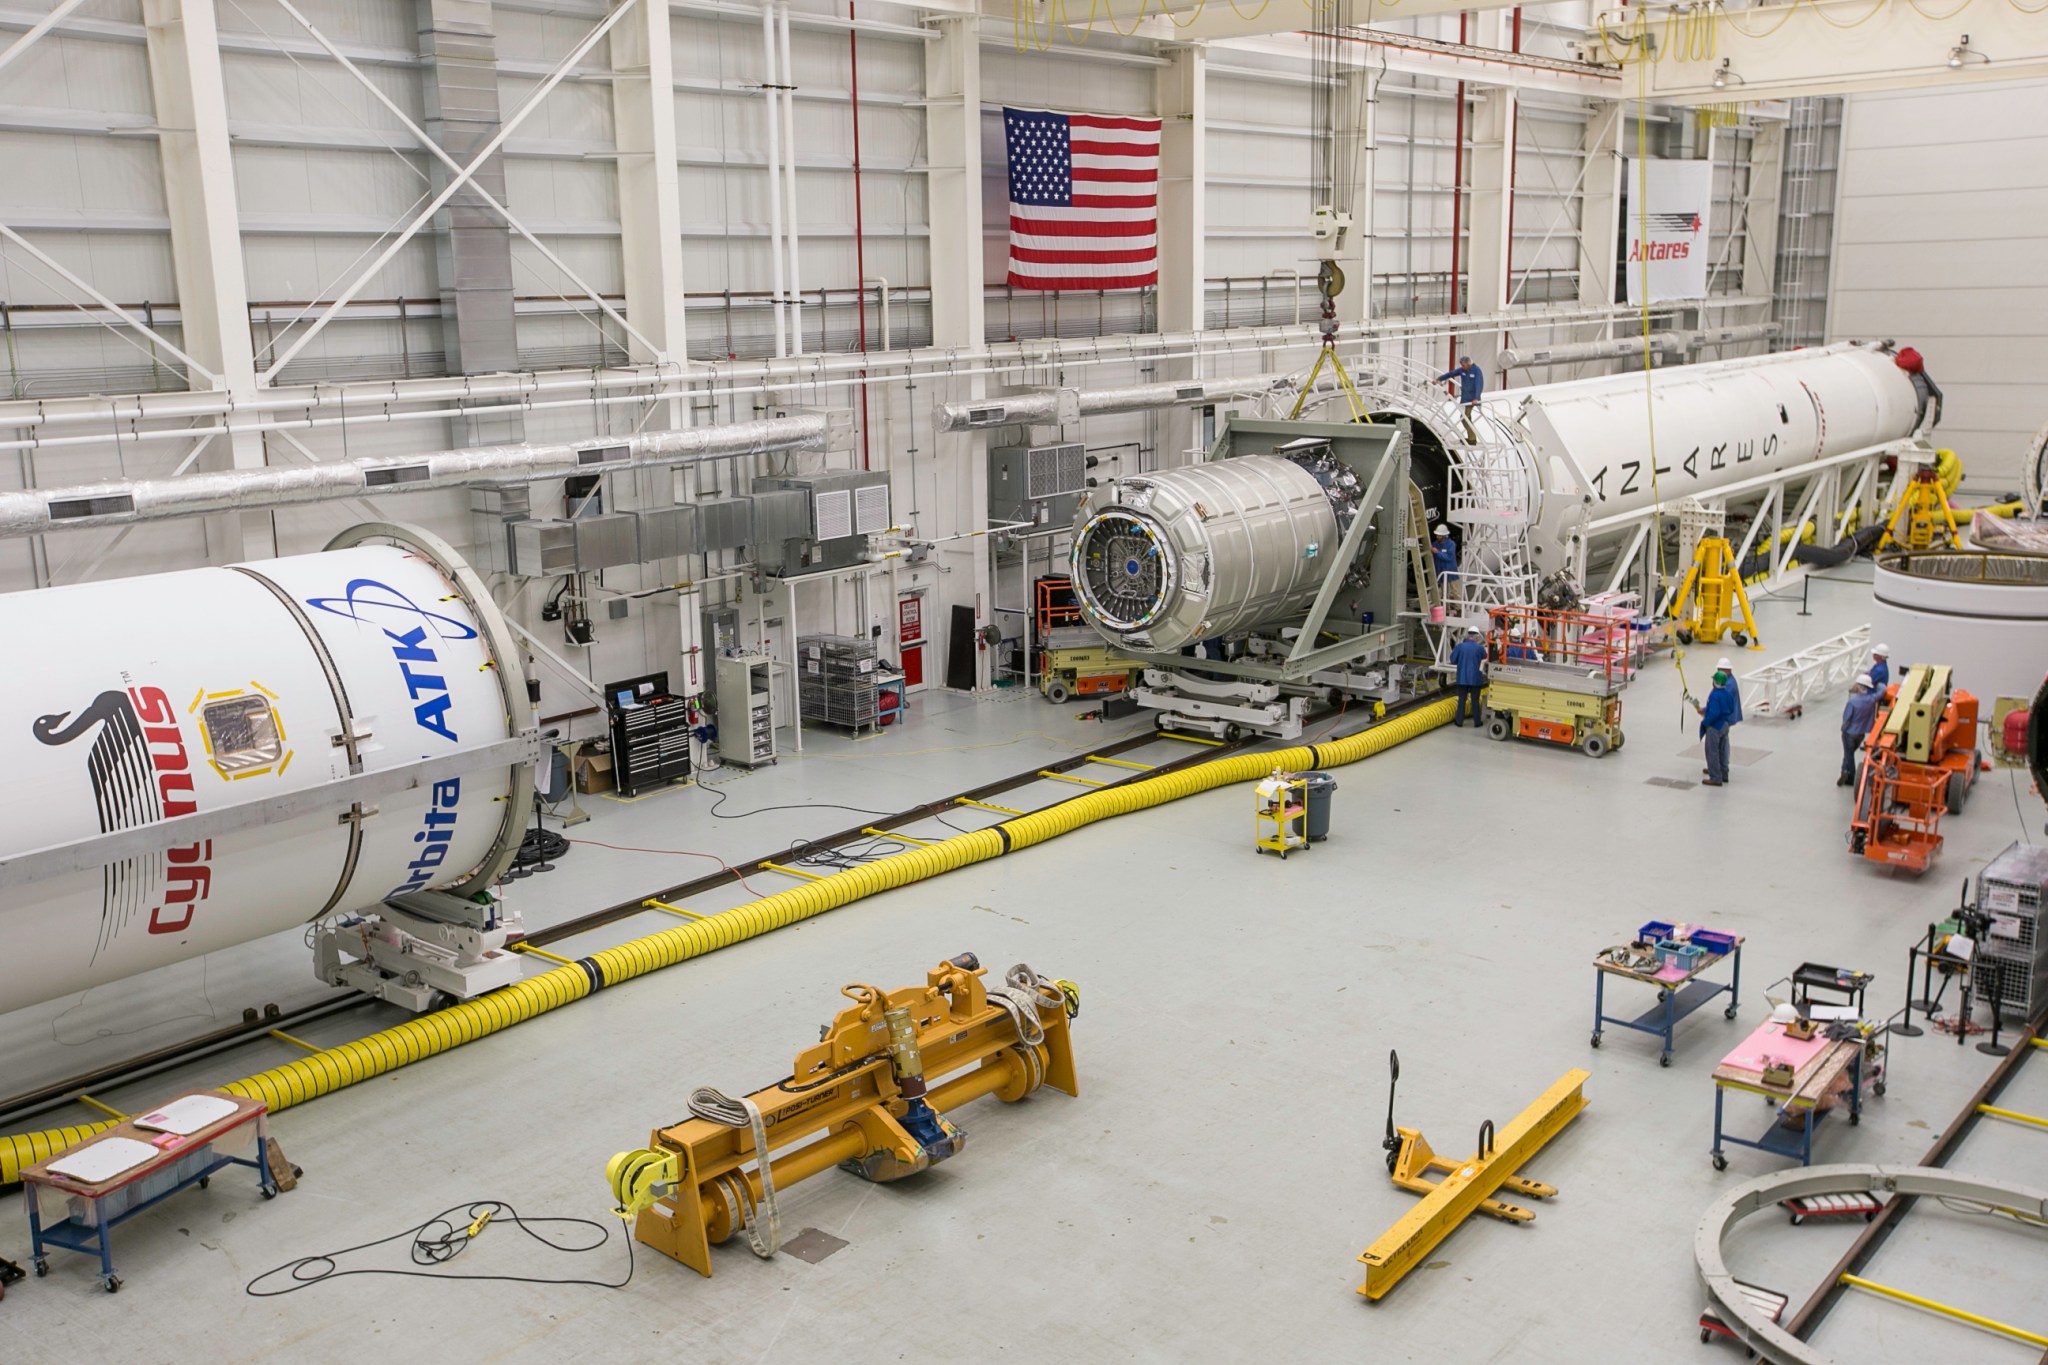 Inside a large clean room with the Antares rocket on its side. The rocket is open, with the top portion off on the left side of the image. The Cygnus payload is attached to the bottom half of the rocket, moved away from the top of the rocket. The rocket is white with the words "Antares" running down the side.